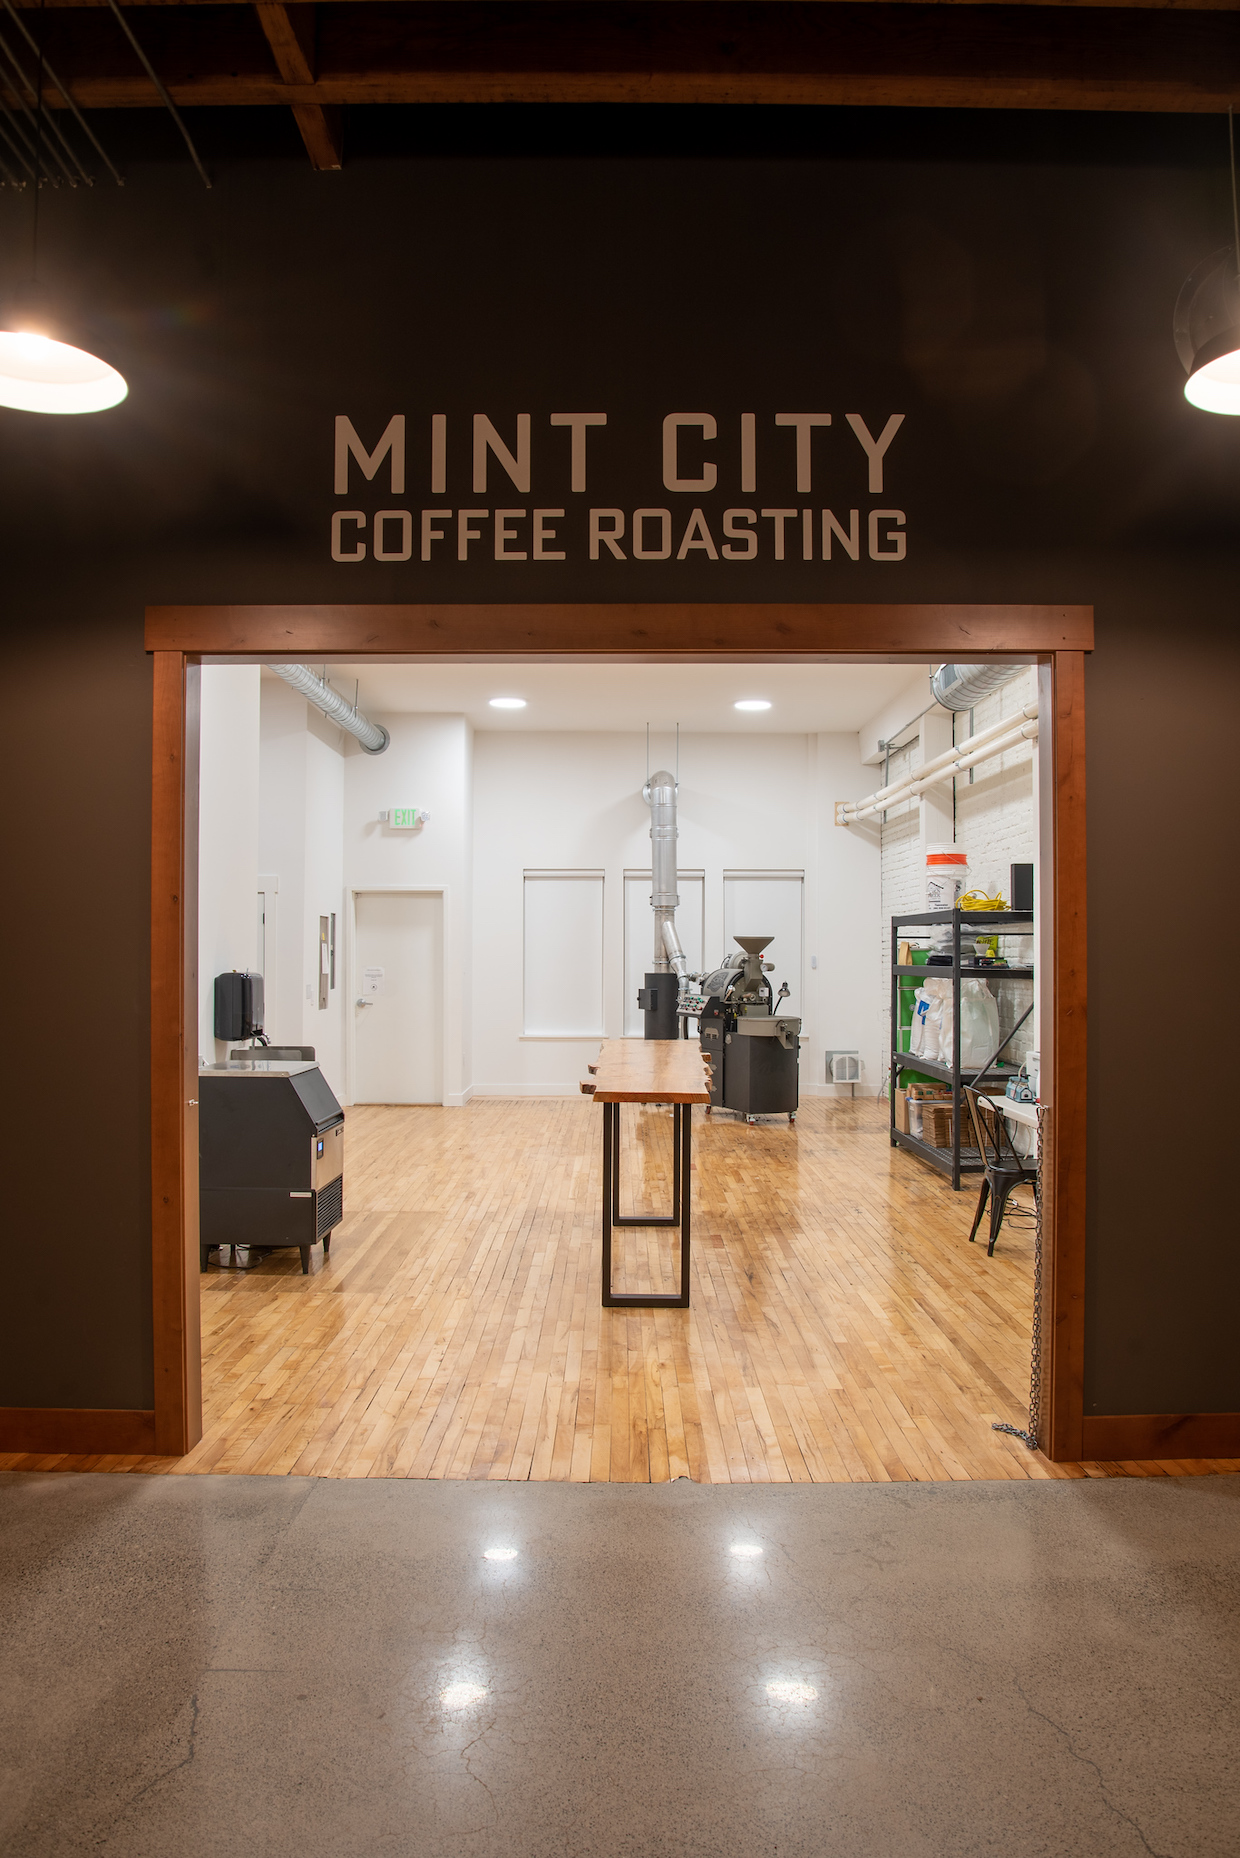 Mint City wall lettering and roasting area